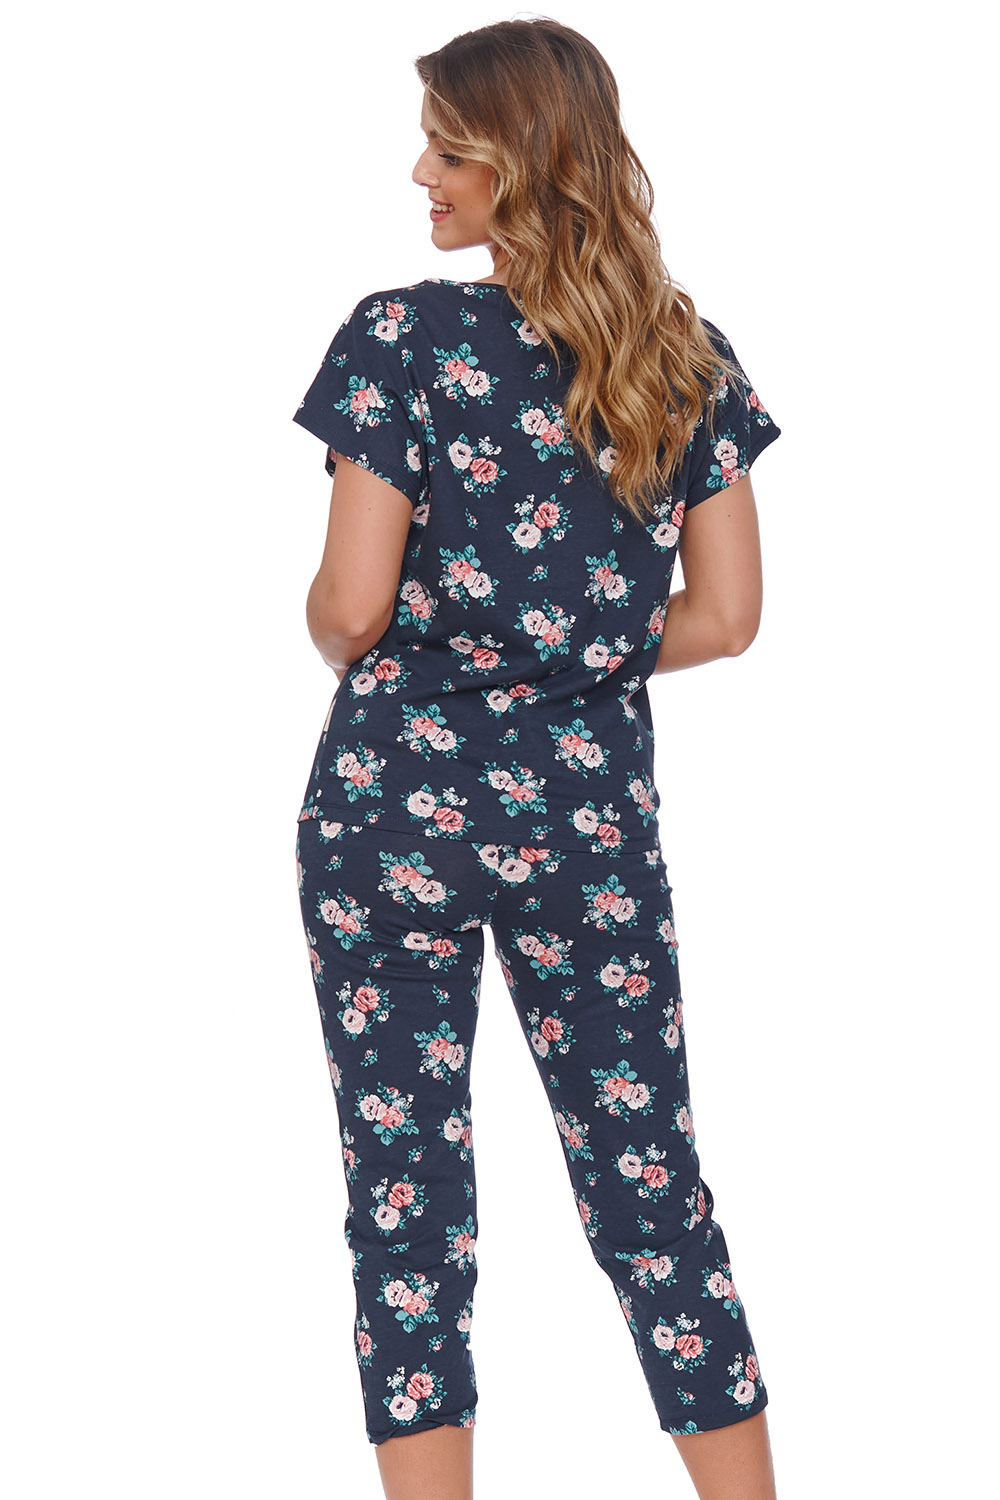 Doctor Nap PM.4523 - roses